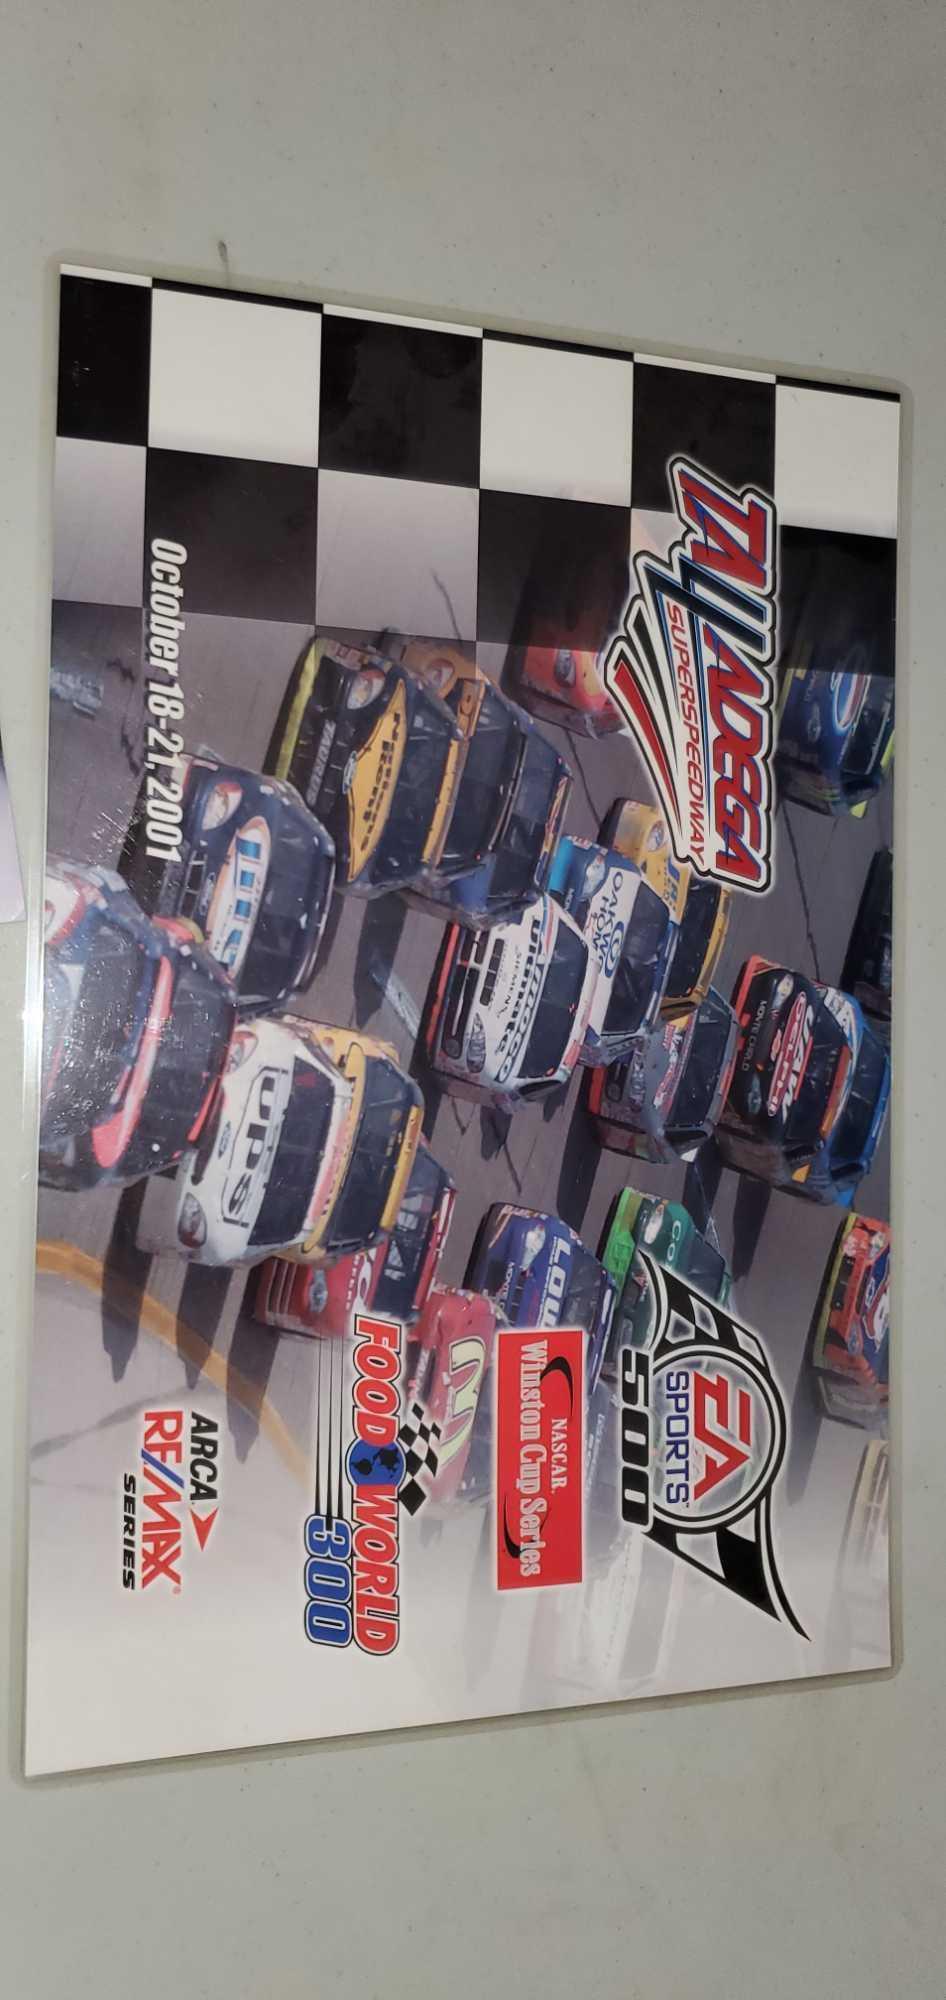 H- NASCAR posters and key chains